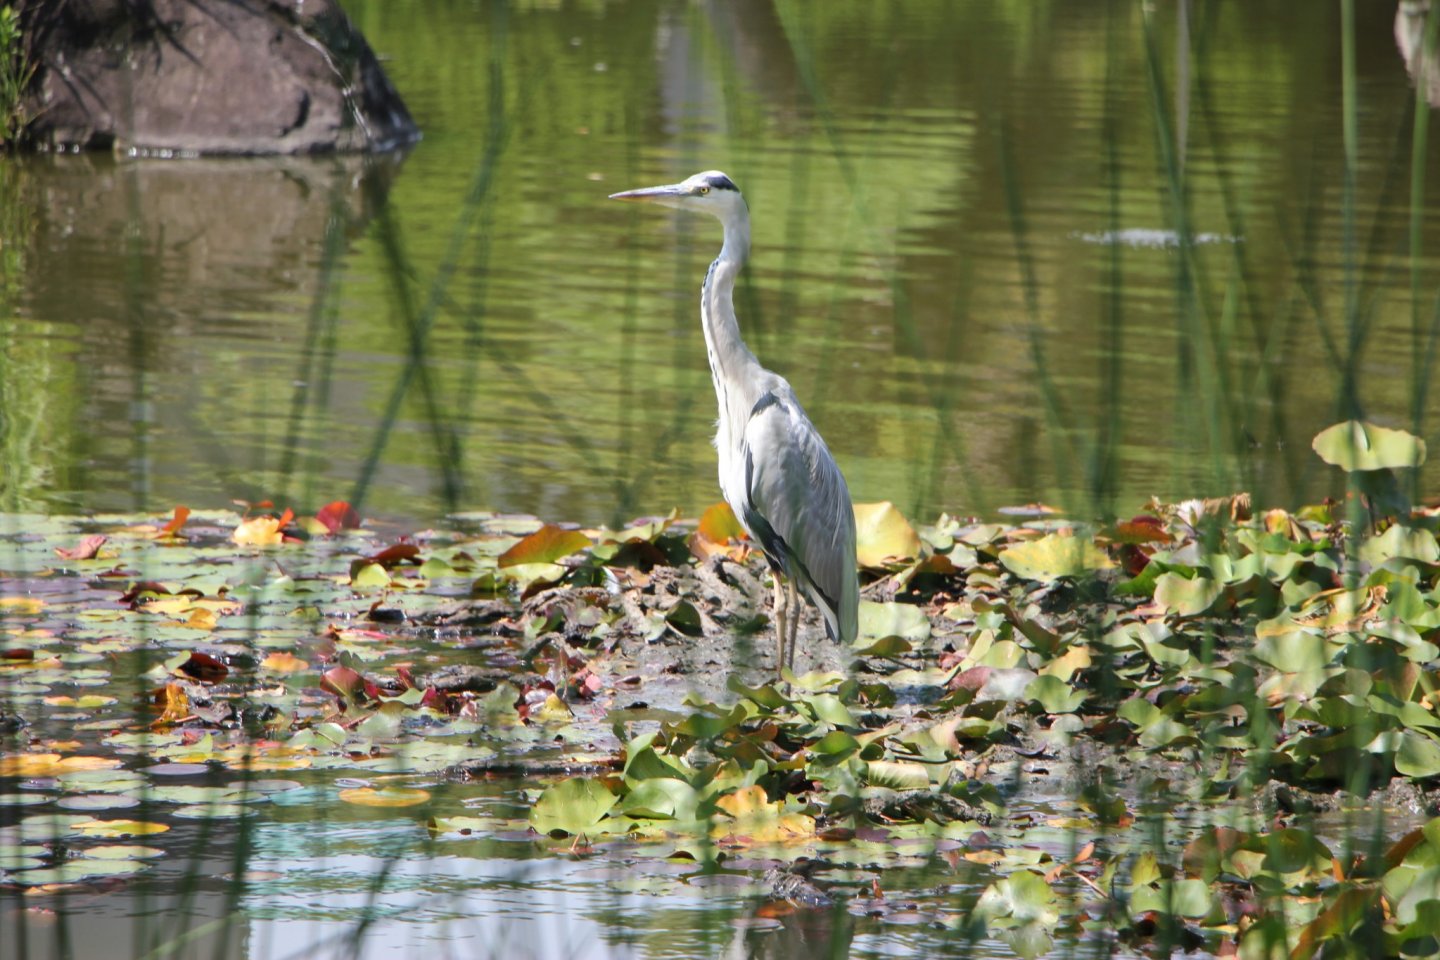 A heron cleaning its feathers in the middle of the pond